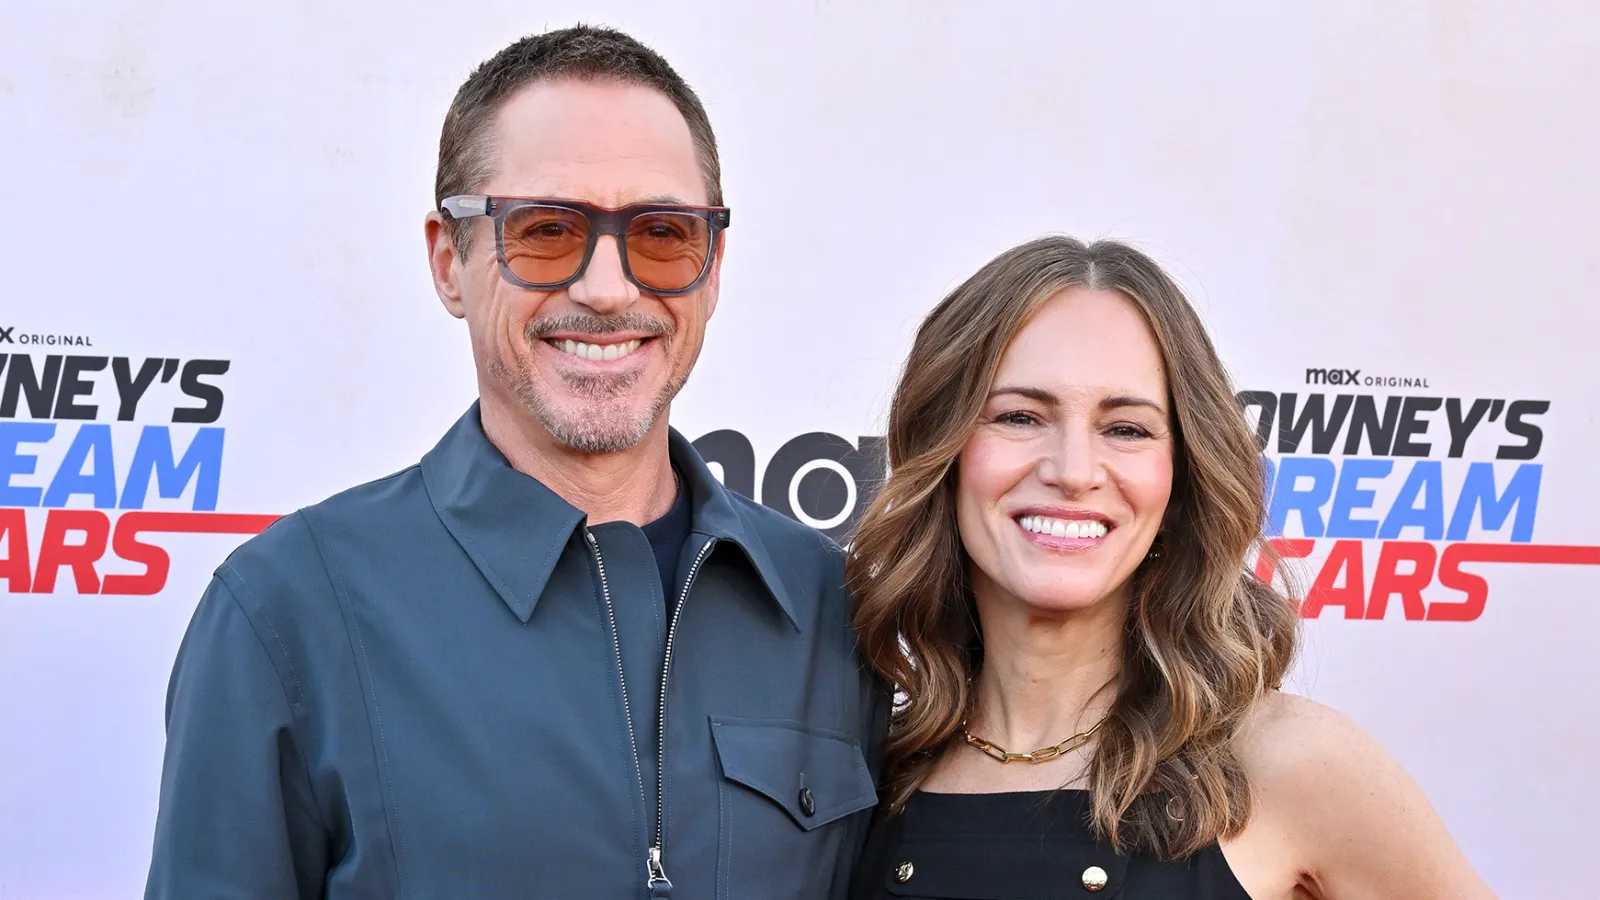 Robert Downey Jr's wife reveals the simple rule that keeps their marriage strong